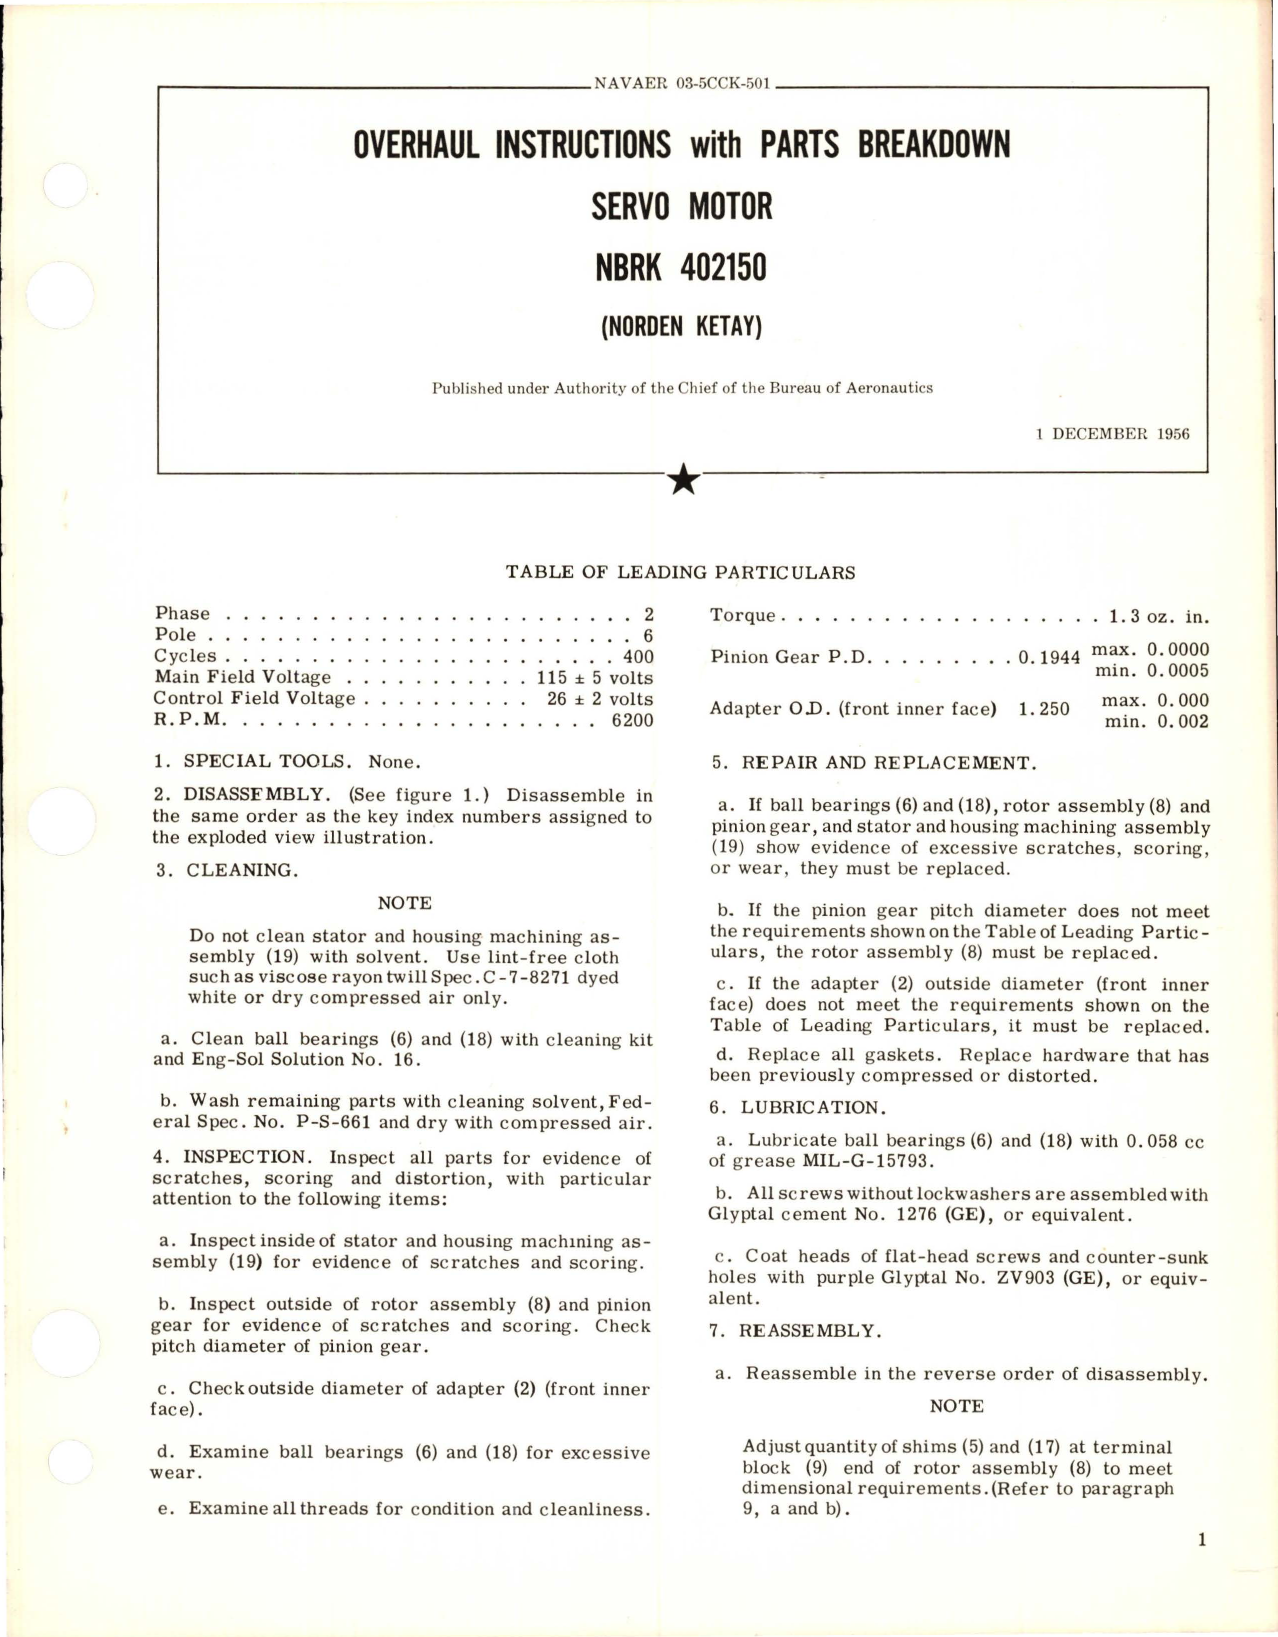 Sample page 1 from AirCorps Library document: Overhaul Instructions with Parts Breakdown for Servo Motor - NBRK 402150